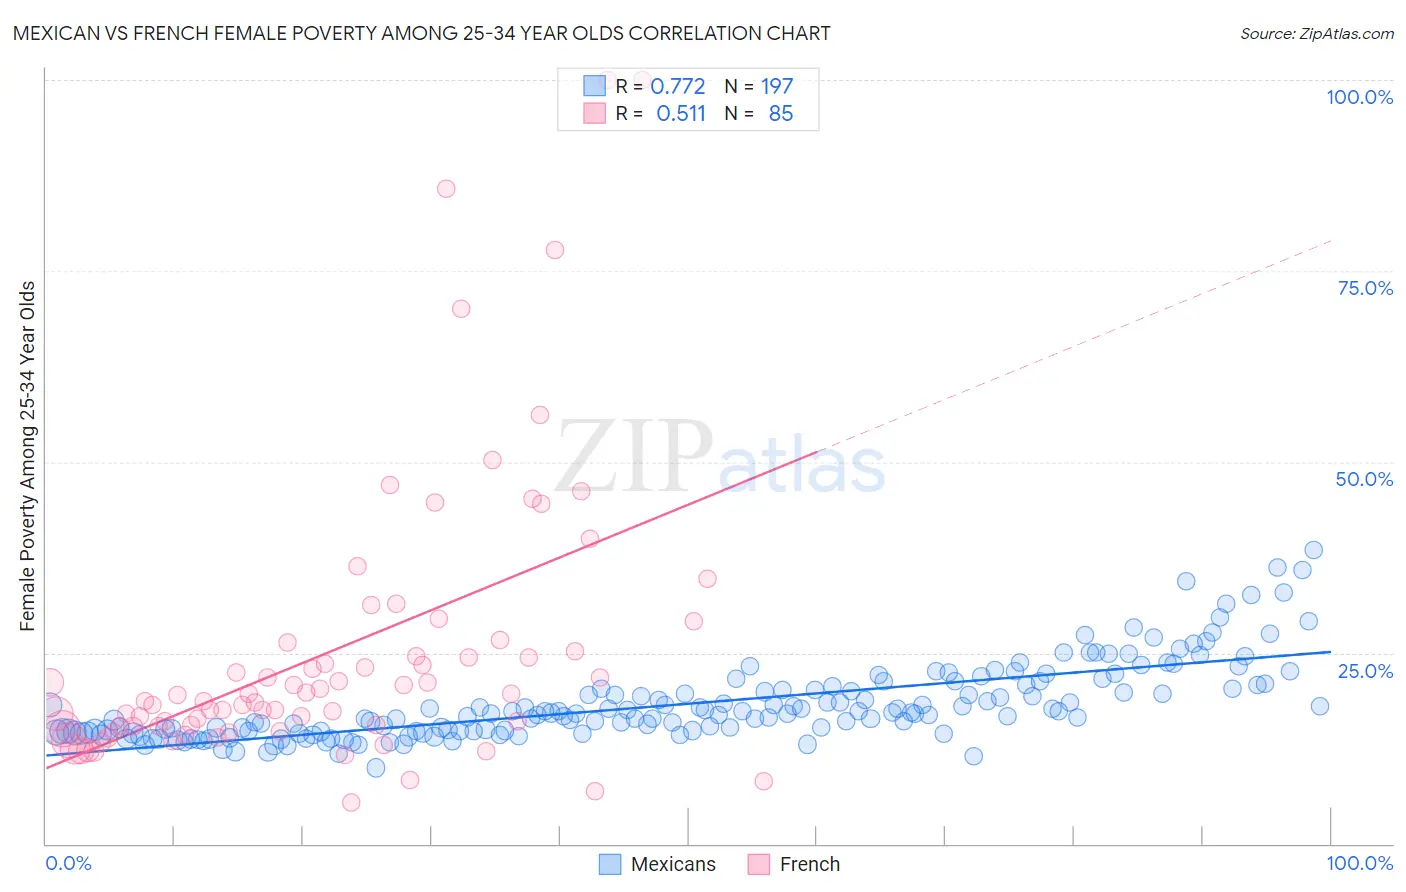 Mexican vs French Female Poverty Among 25-34 Year Olds